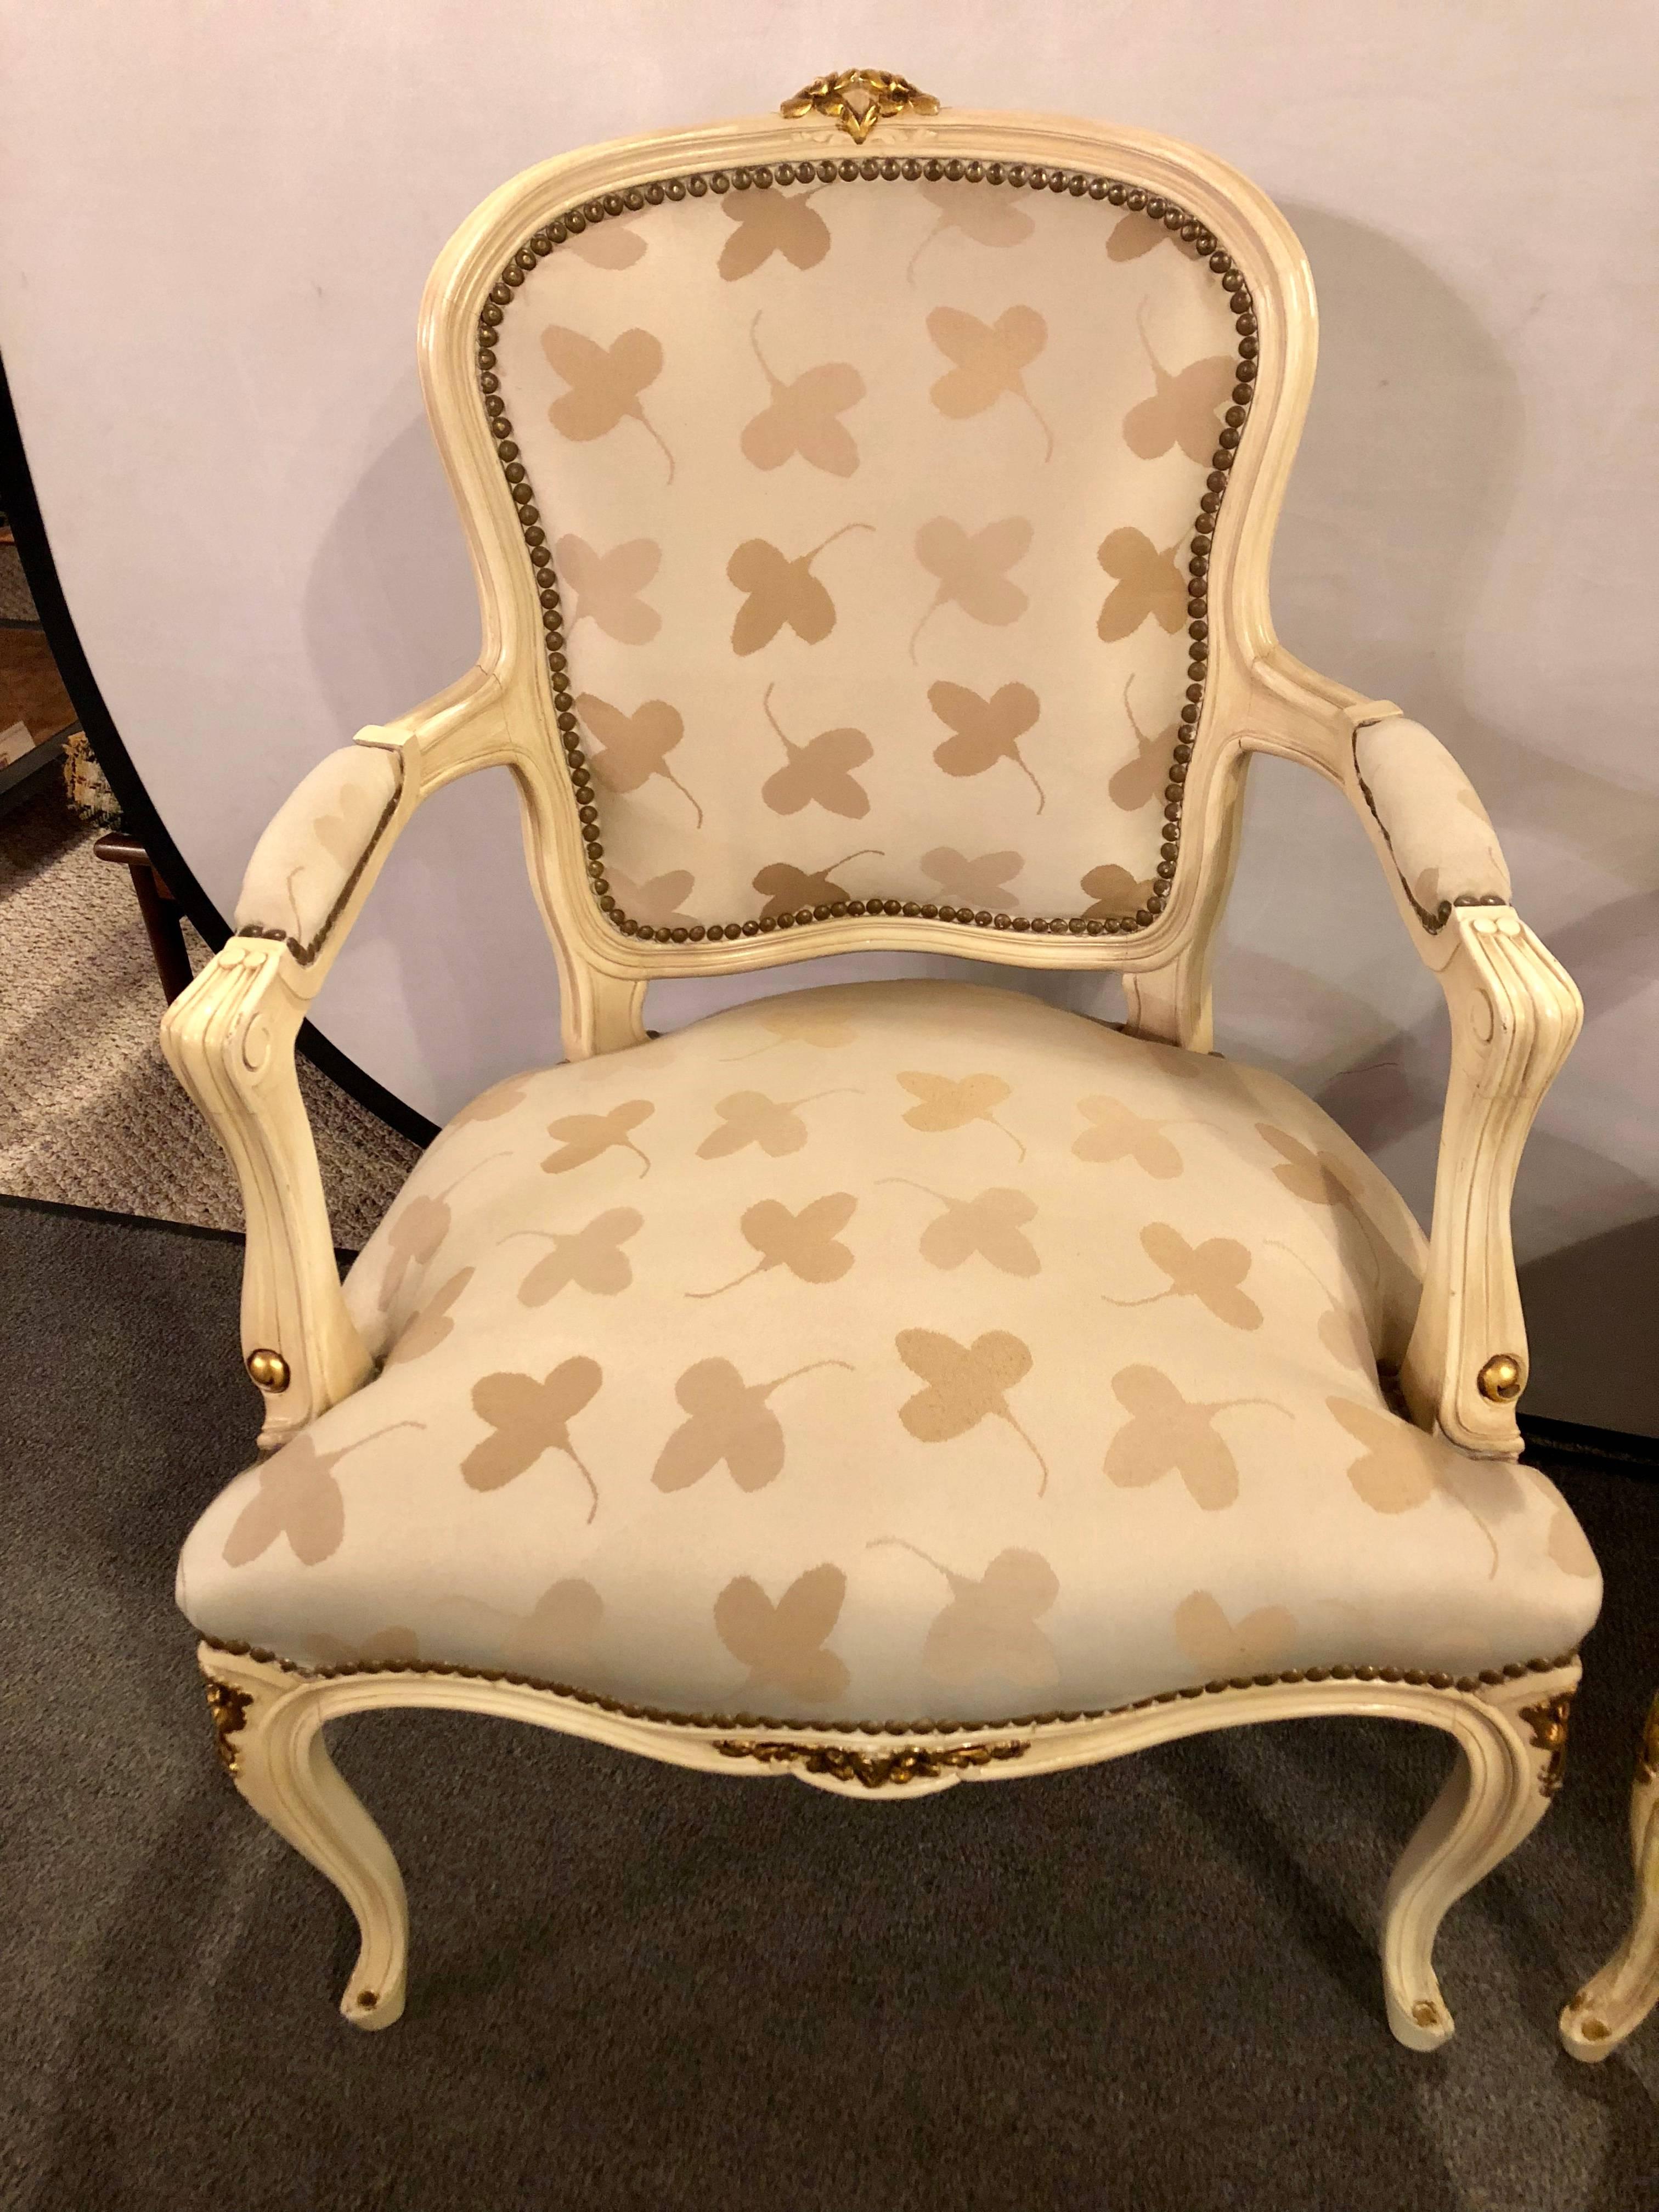 Pair of French Louis XV style parcel-gilt and paint decorated bergere chairs Jansen inspired. These lovely and elegant armchairs would look spectacular in any living room or office setting. Both in a clean tweed style leaf design fabric with a seat